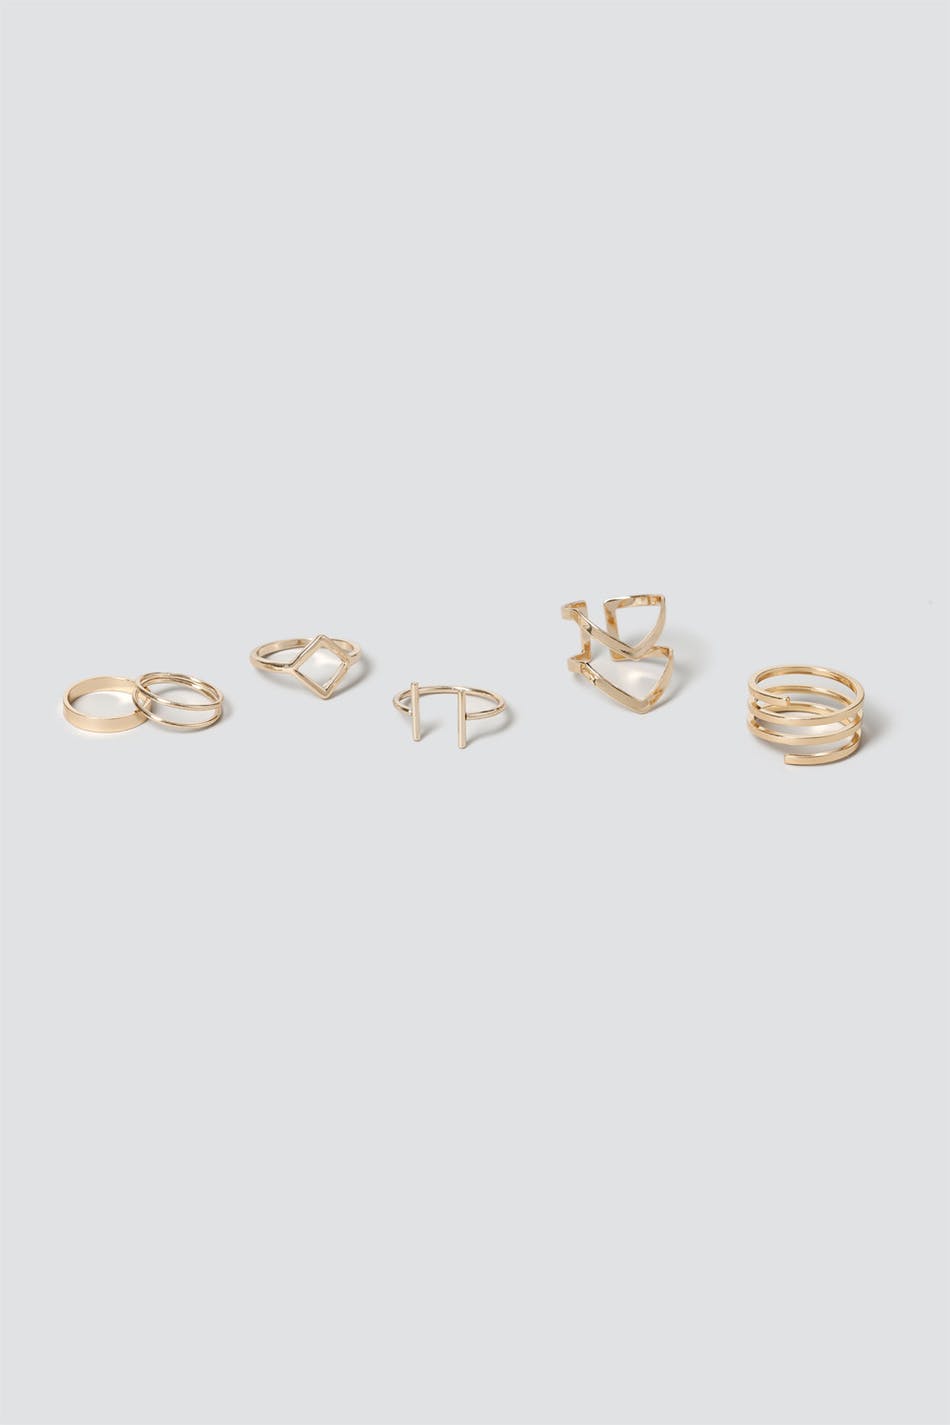 Geometric Shapes Ring Pack in Gold